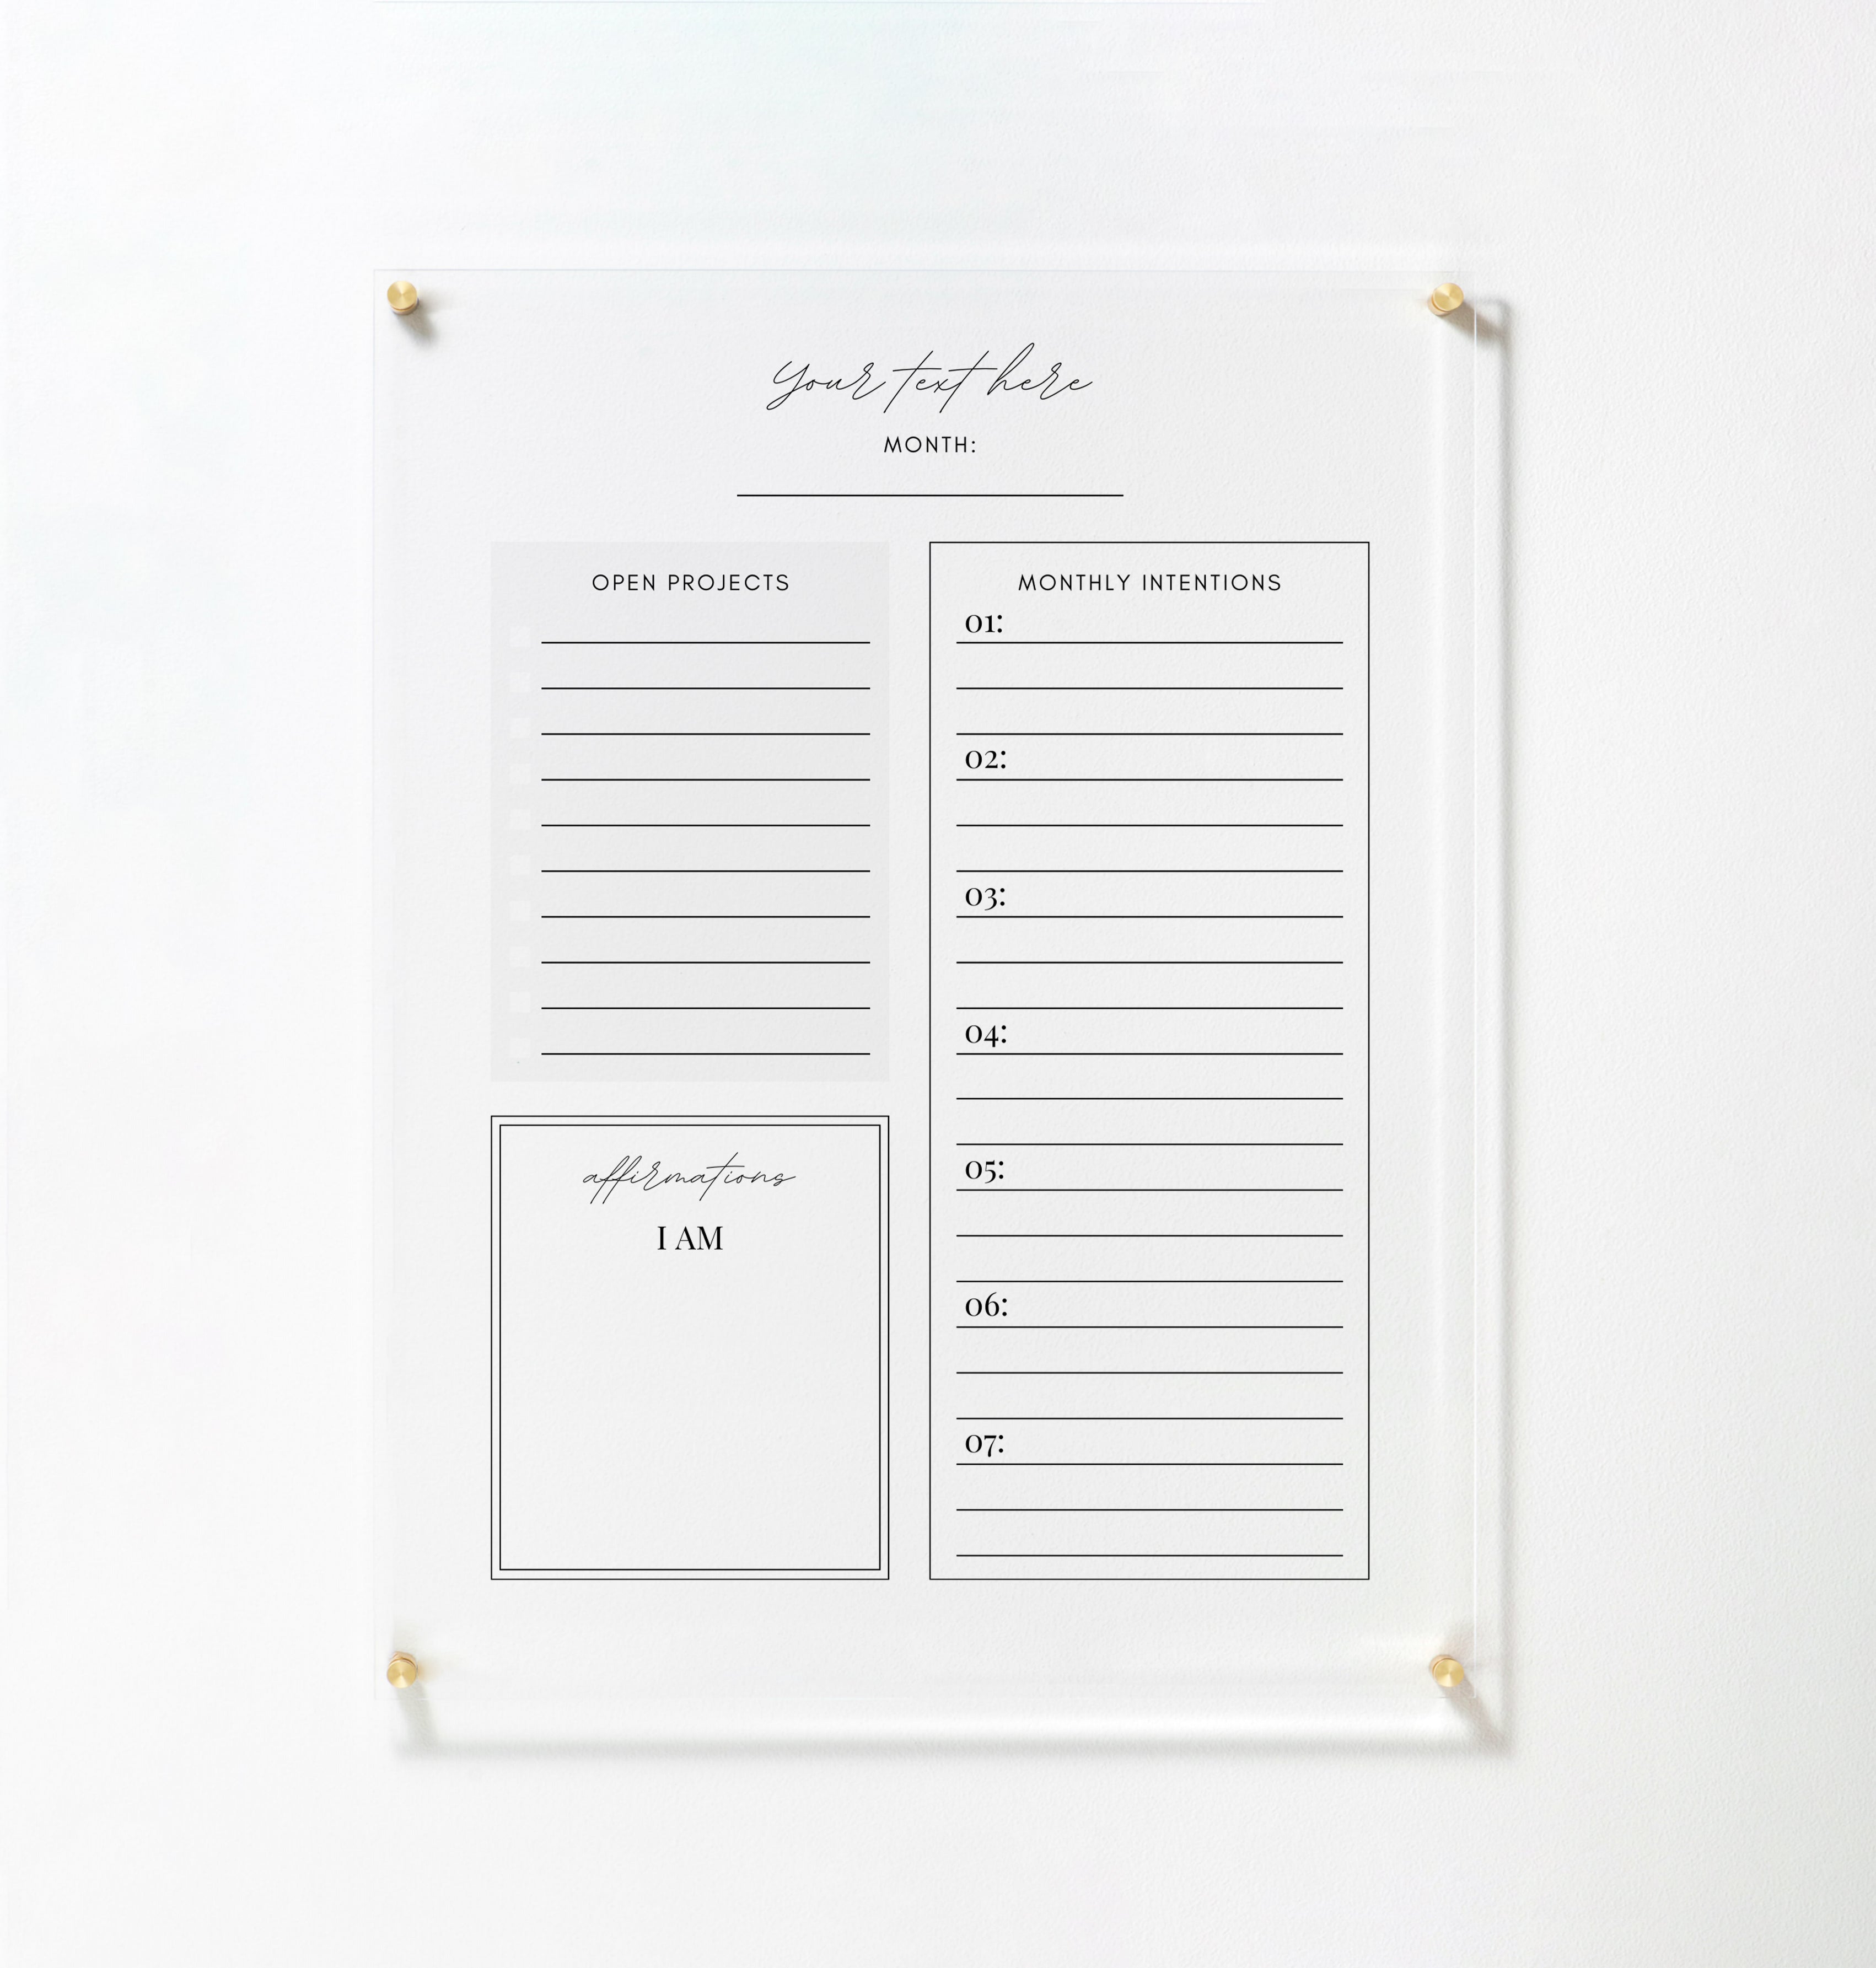 The full view of the same acrylic board, mounted on a white wall with gold pins. The board includes sections for open projects, monthly intentions, and affirmations, offering a structured layout for organizing tasks and setting intentions.